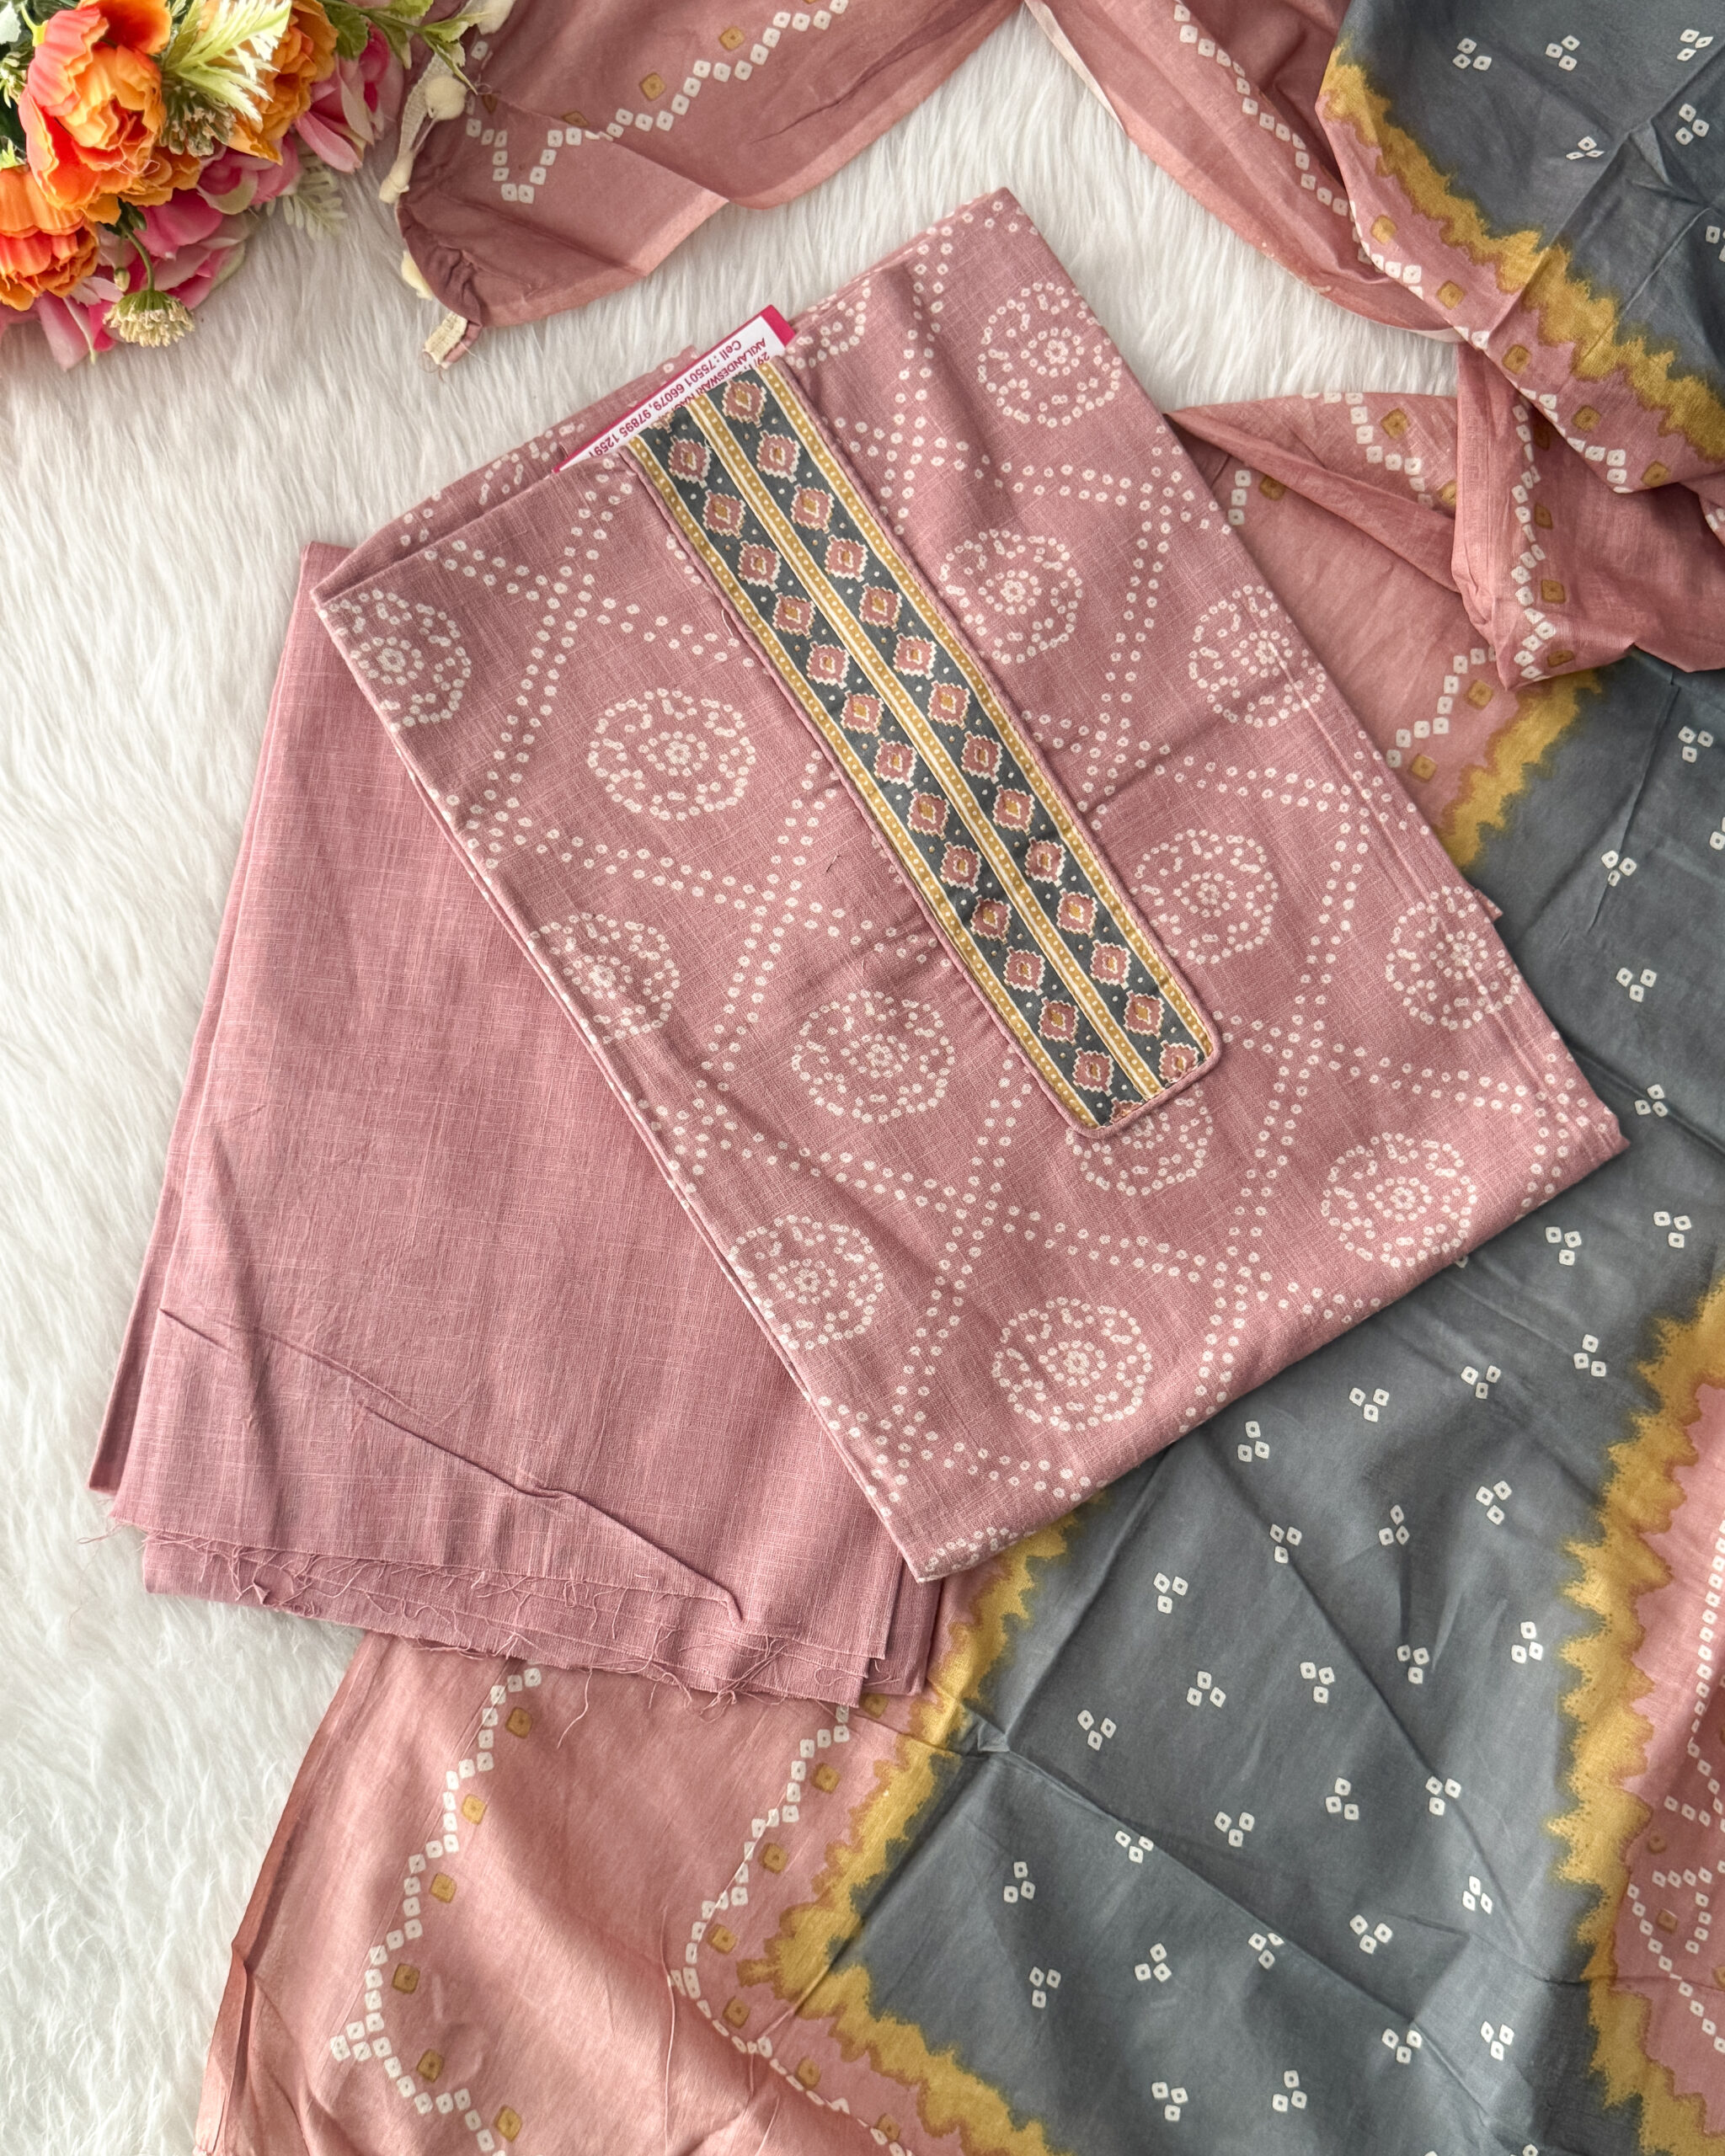 Ethnic bandhani printed pure cotton material with neck pattern comes with plain bottom and printed dupatta with pompom. It is a perfect choice for causal wear. It is suitable for both hand wash and machine wash.